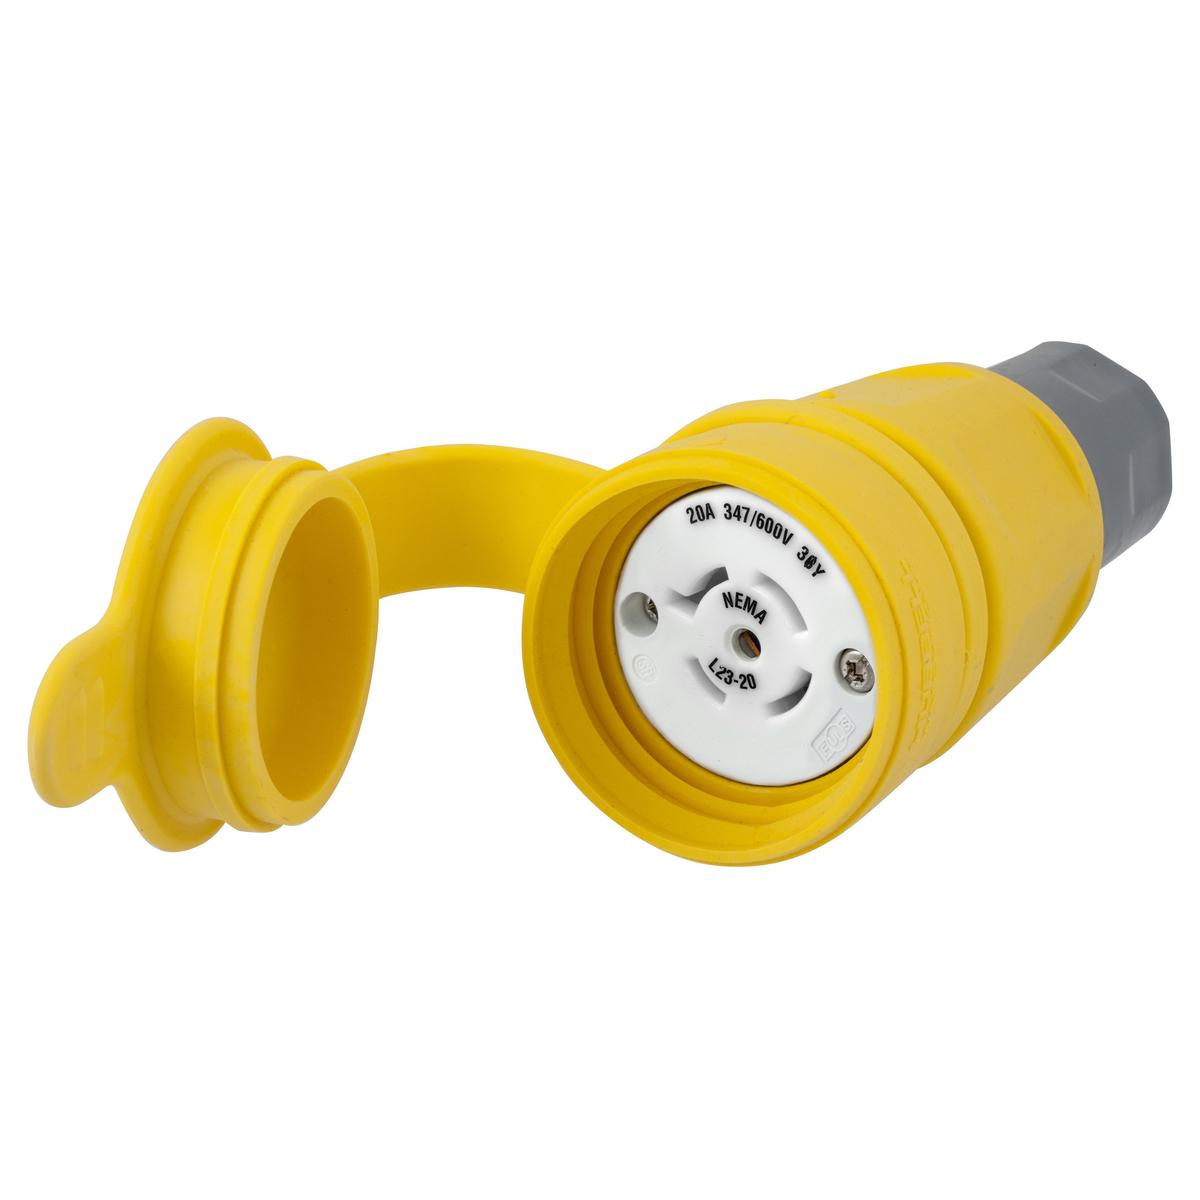 Hubbell HBL27W83 Watertight Devices, Twist-Lock® Connector, 20A, 3 Phase WYE 347/600V AC, 4 Pole, 5 Wire, Thermoplastic elastomer, NEMA L23-20R, Yellow  ; Smooth body design minimizes collection points simplifying the wash down process ; Strain relief nut always seals on 